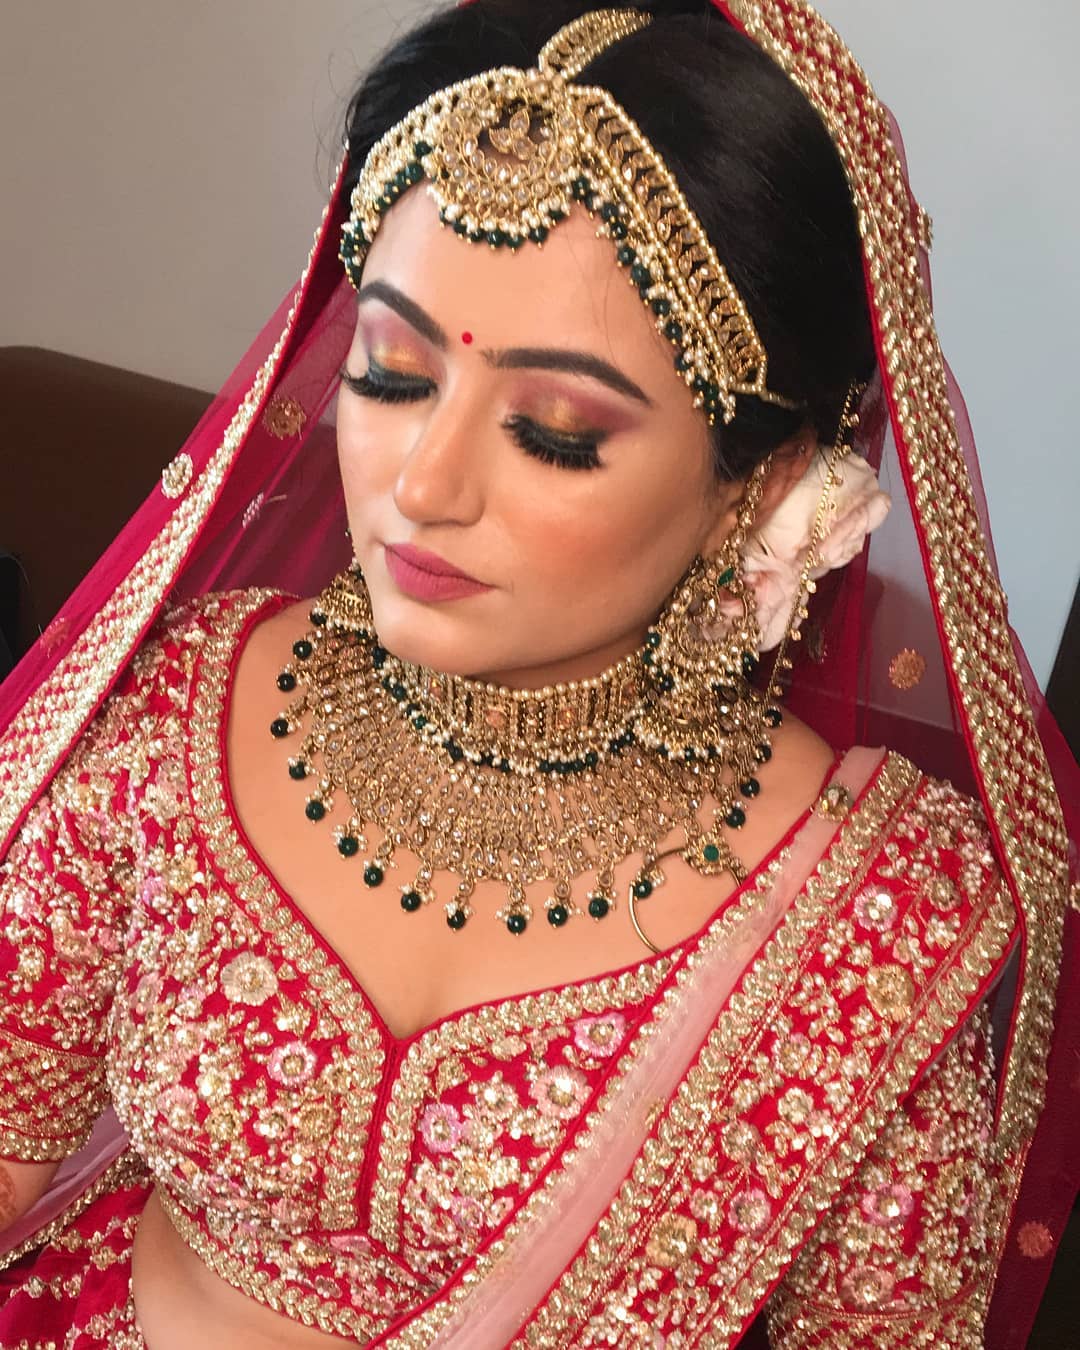  Soft and subtle: Best Bridal Makeup Inspirations to bring out Diva in You